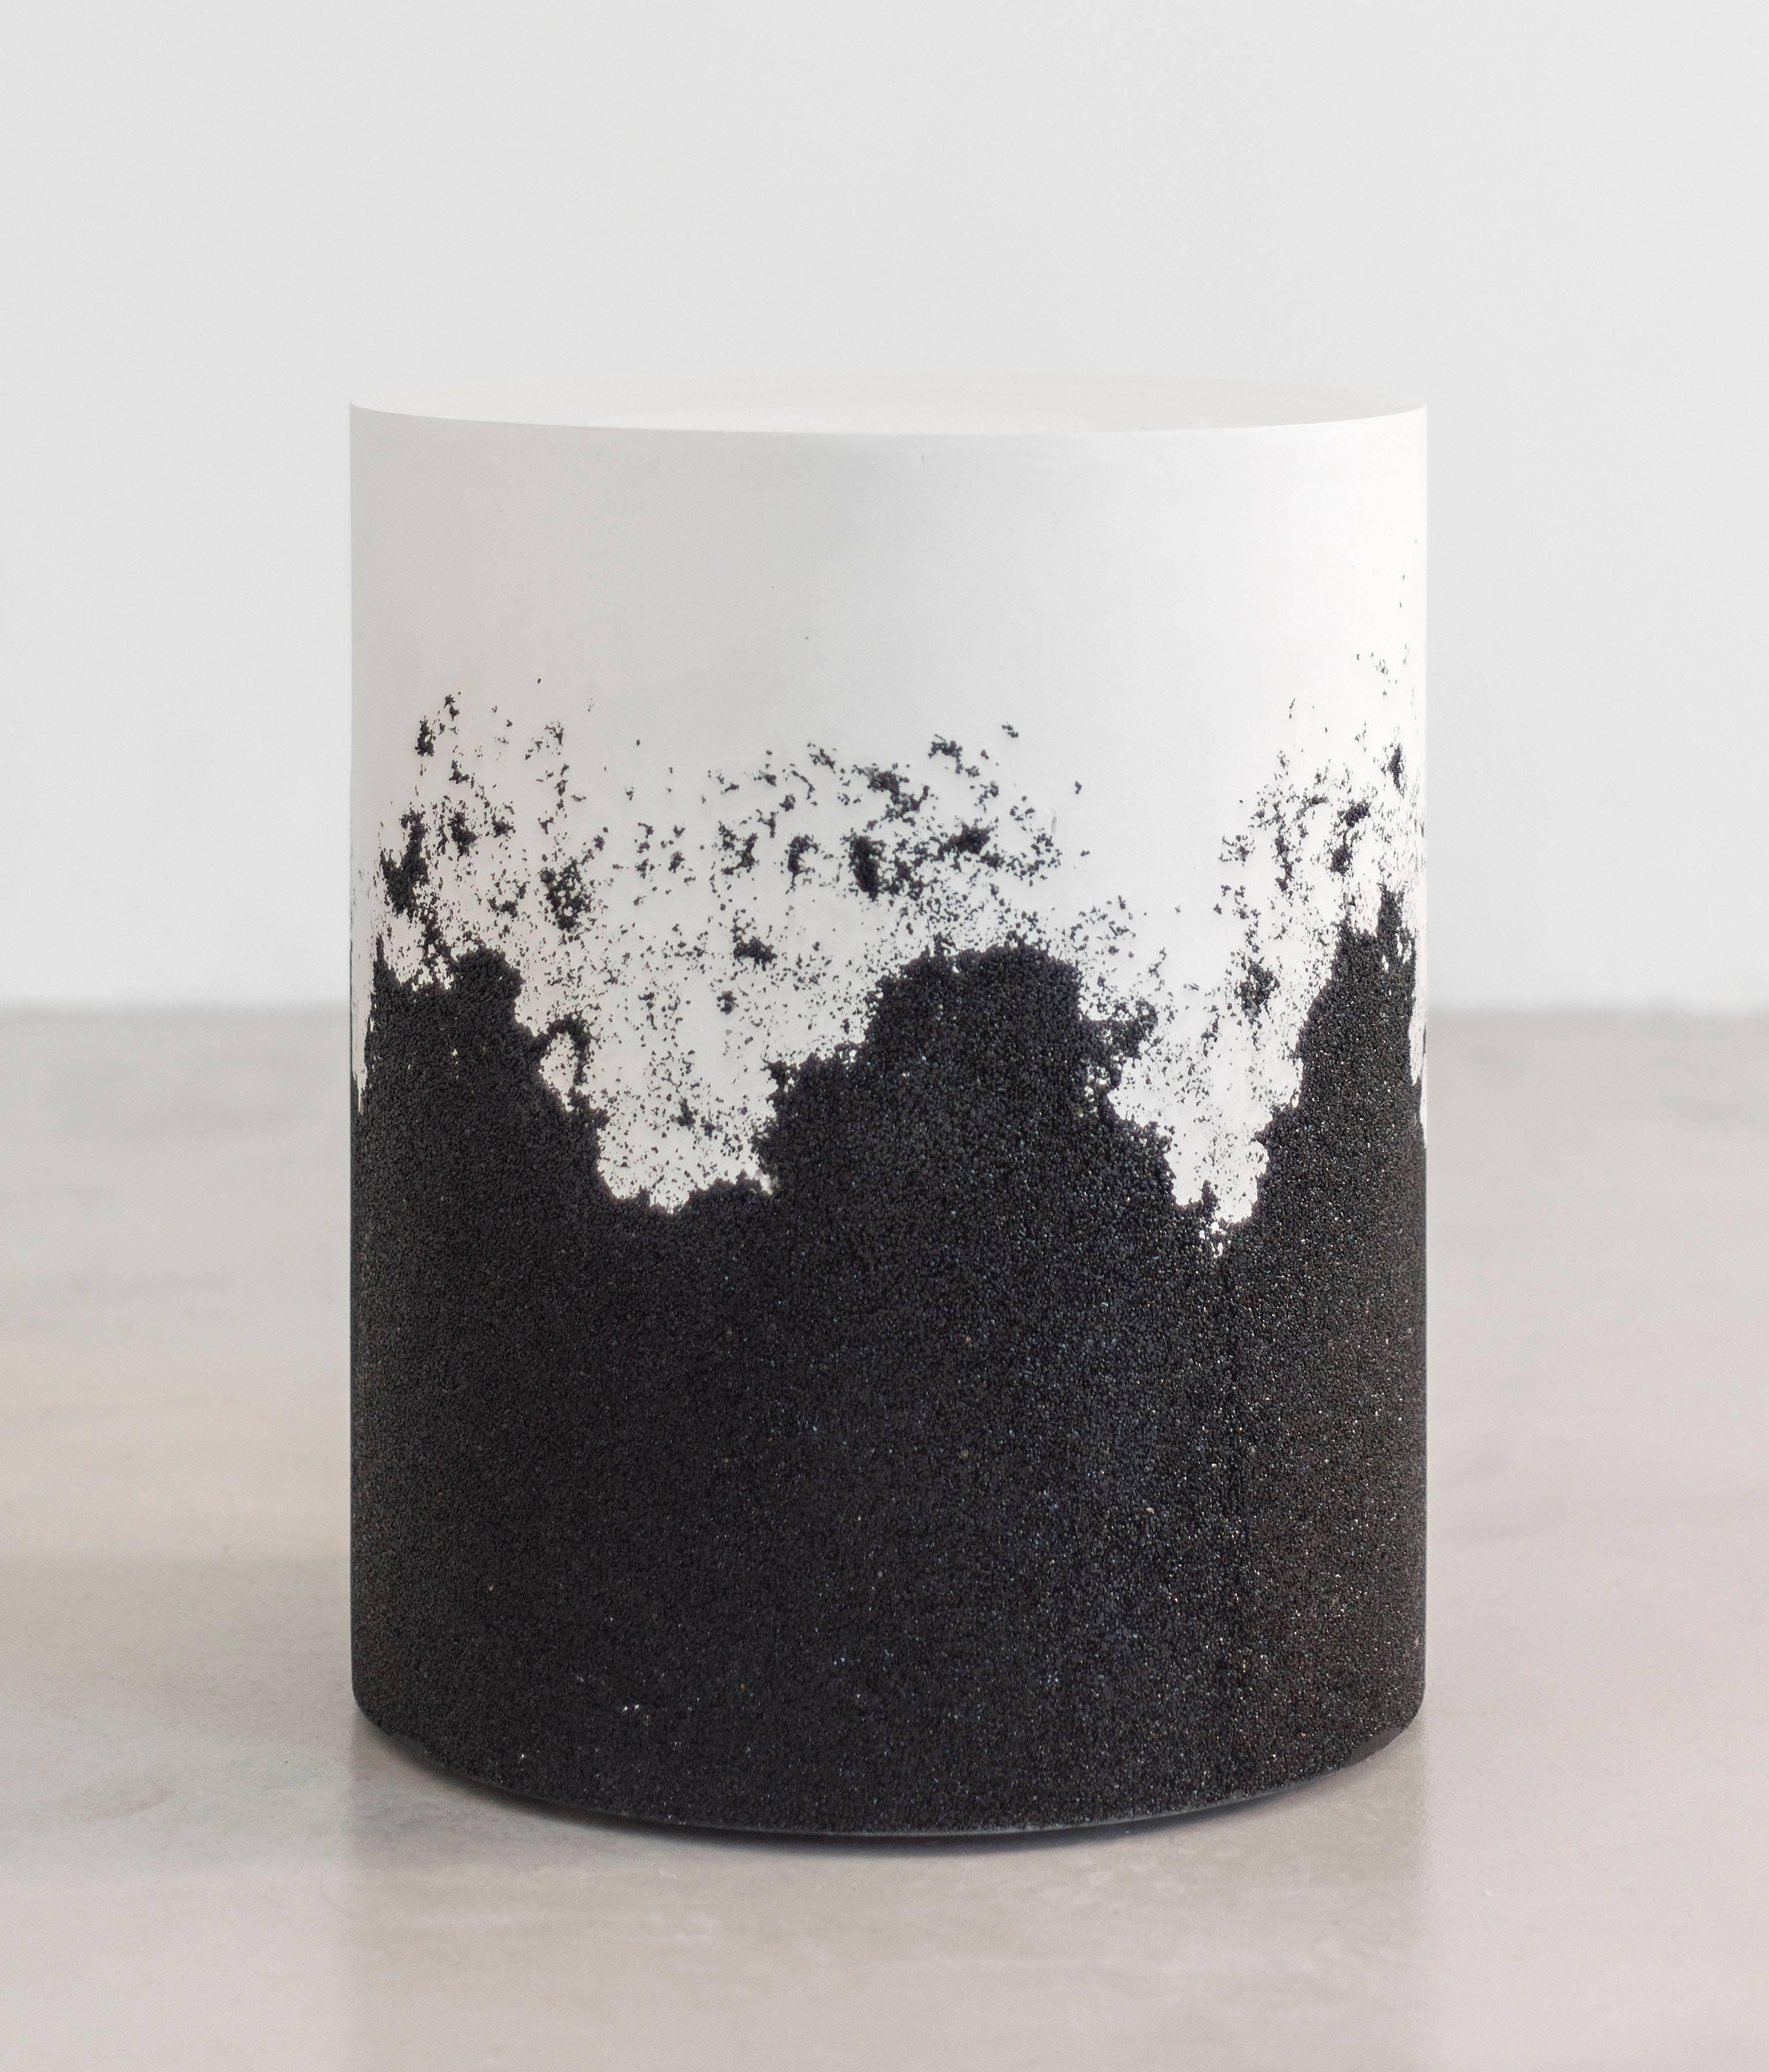 A layering of cement and crushed aggregates, the made-to-order drum consists of an hand-dyed white cement top and a packed black silica bottom. Poured by hand over the jagged minerals, the white cement merges the materials to create a unique organic